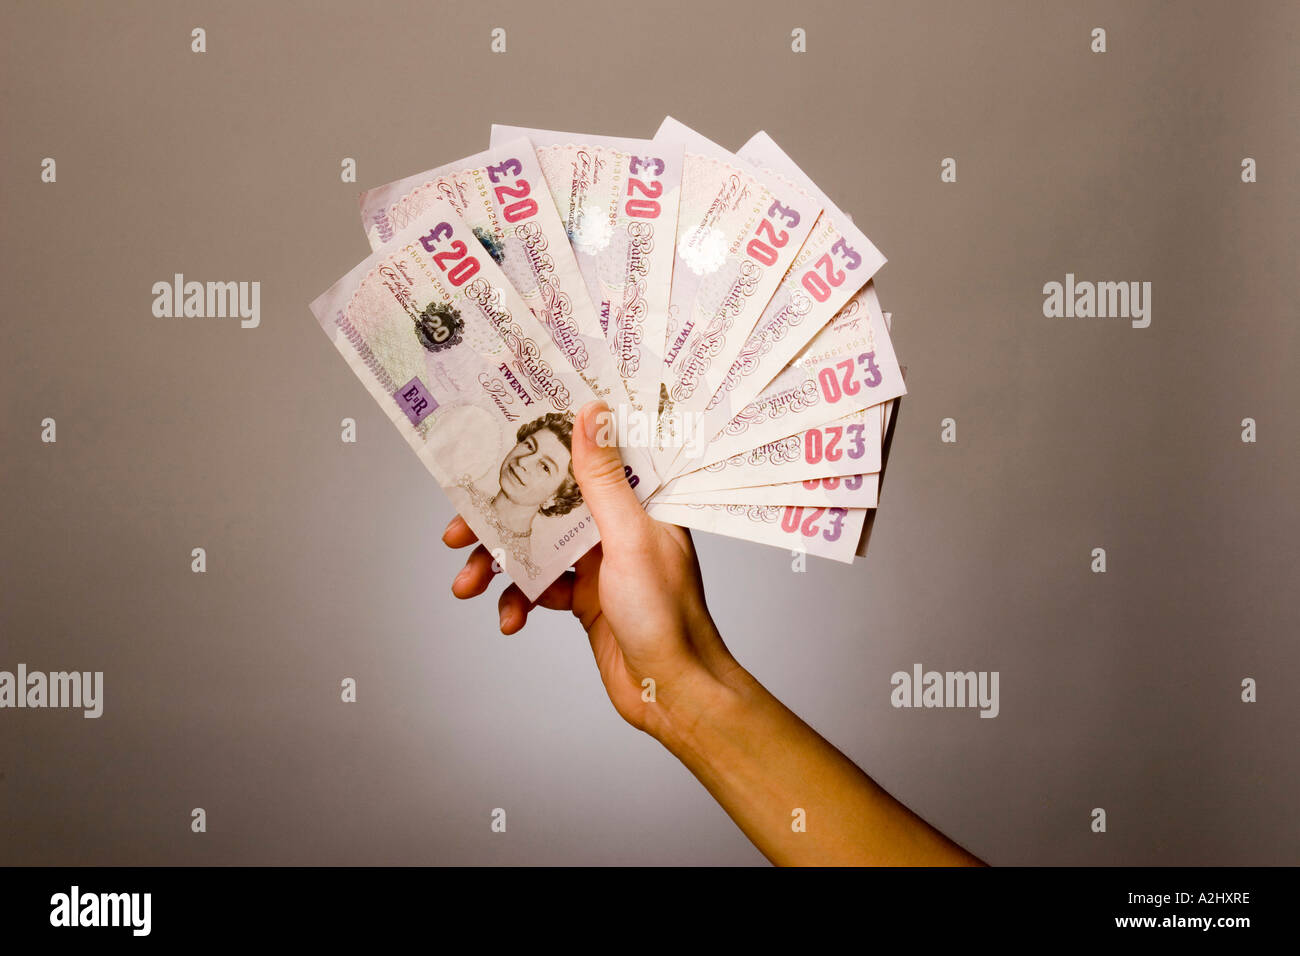 Hand holding/displaying a  fan of £20.00 notes Stock Photo